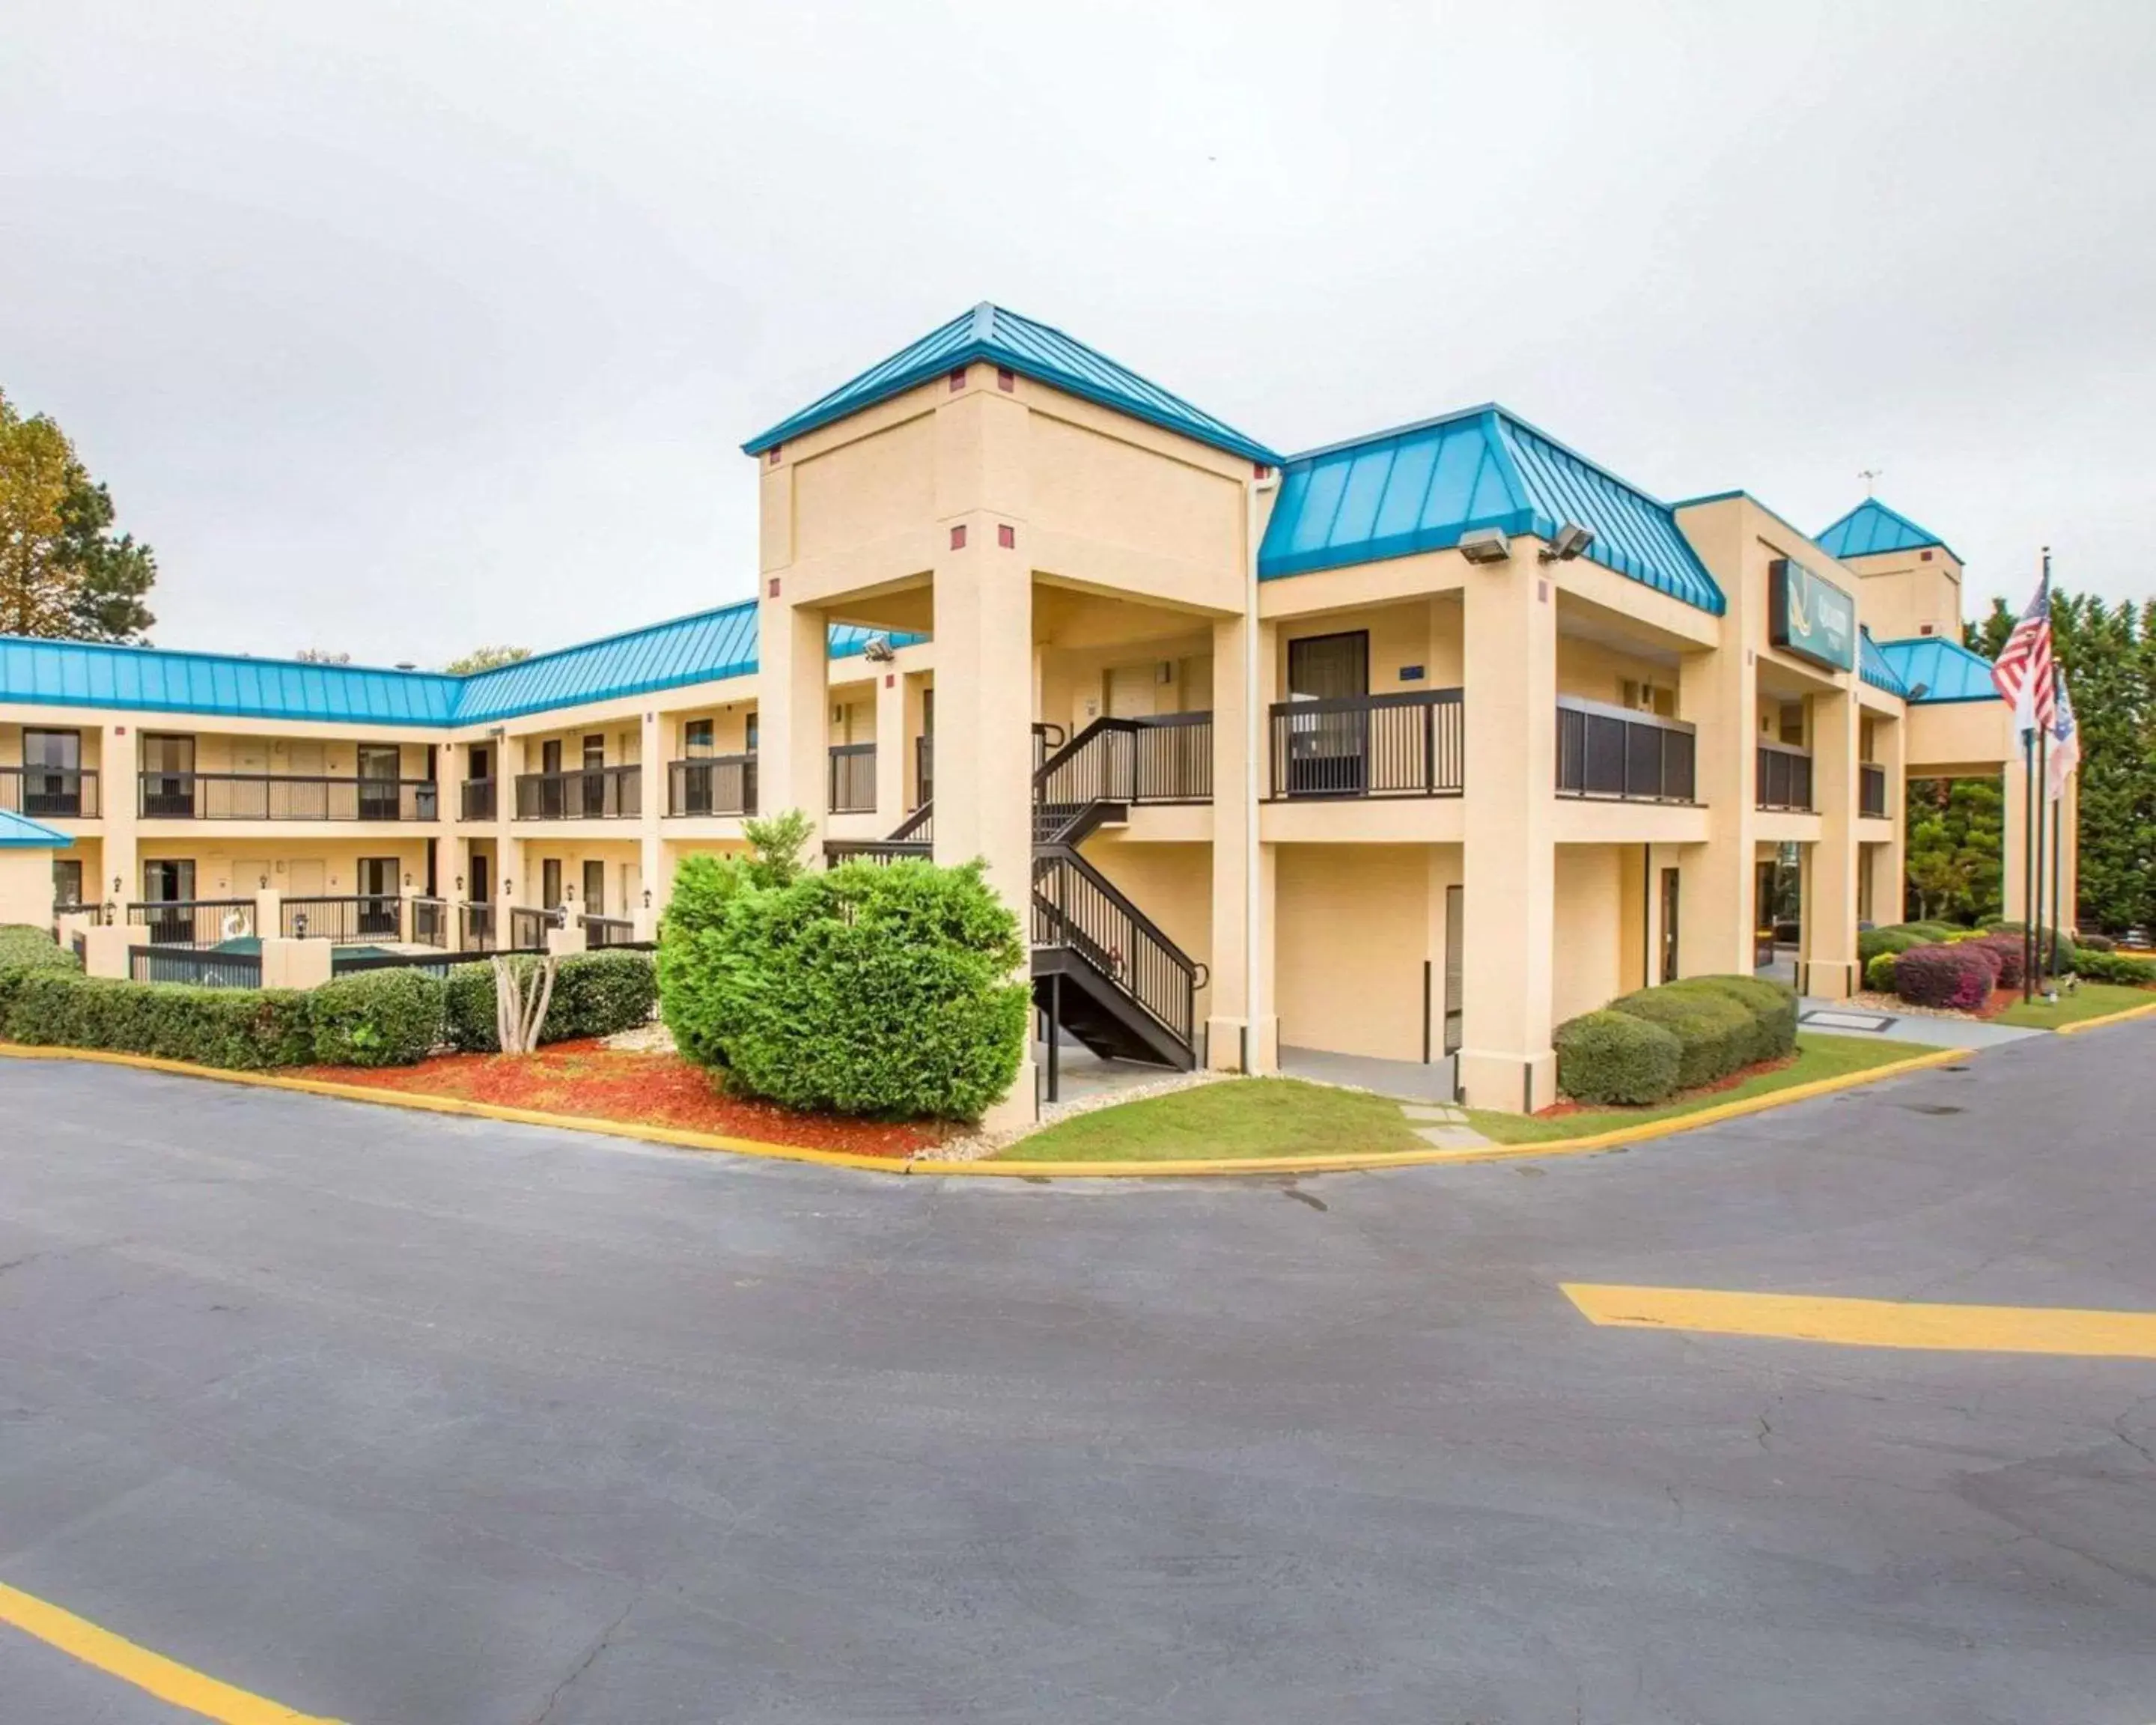 Property Building in Quality Inn near Six Flags Douglasville